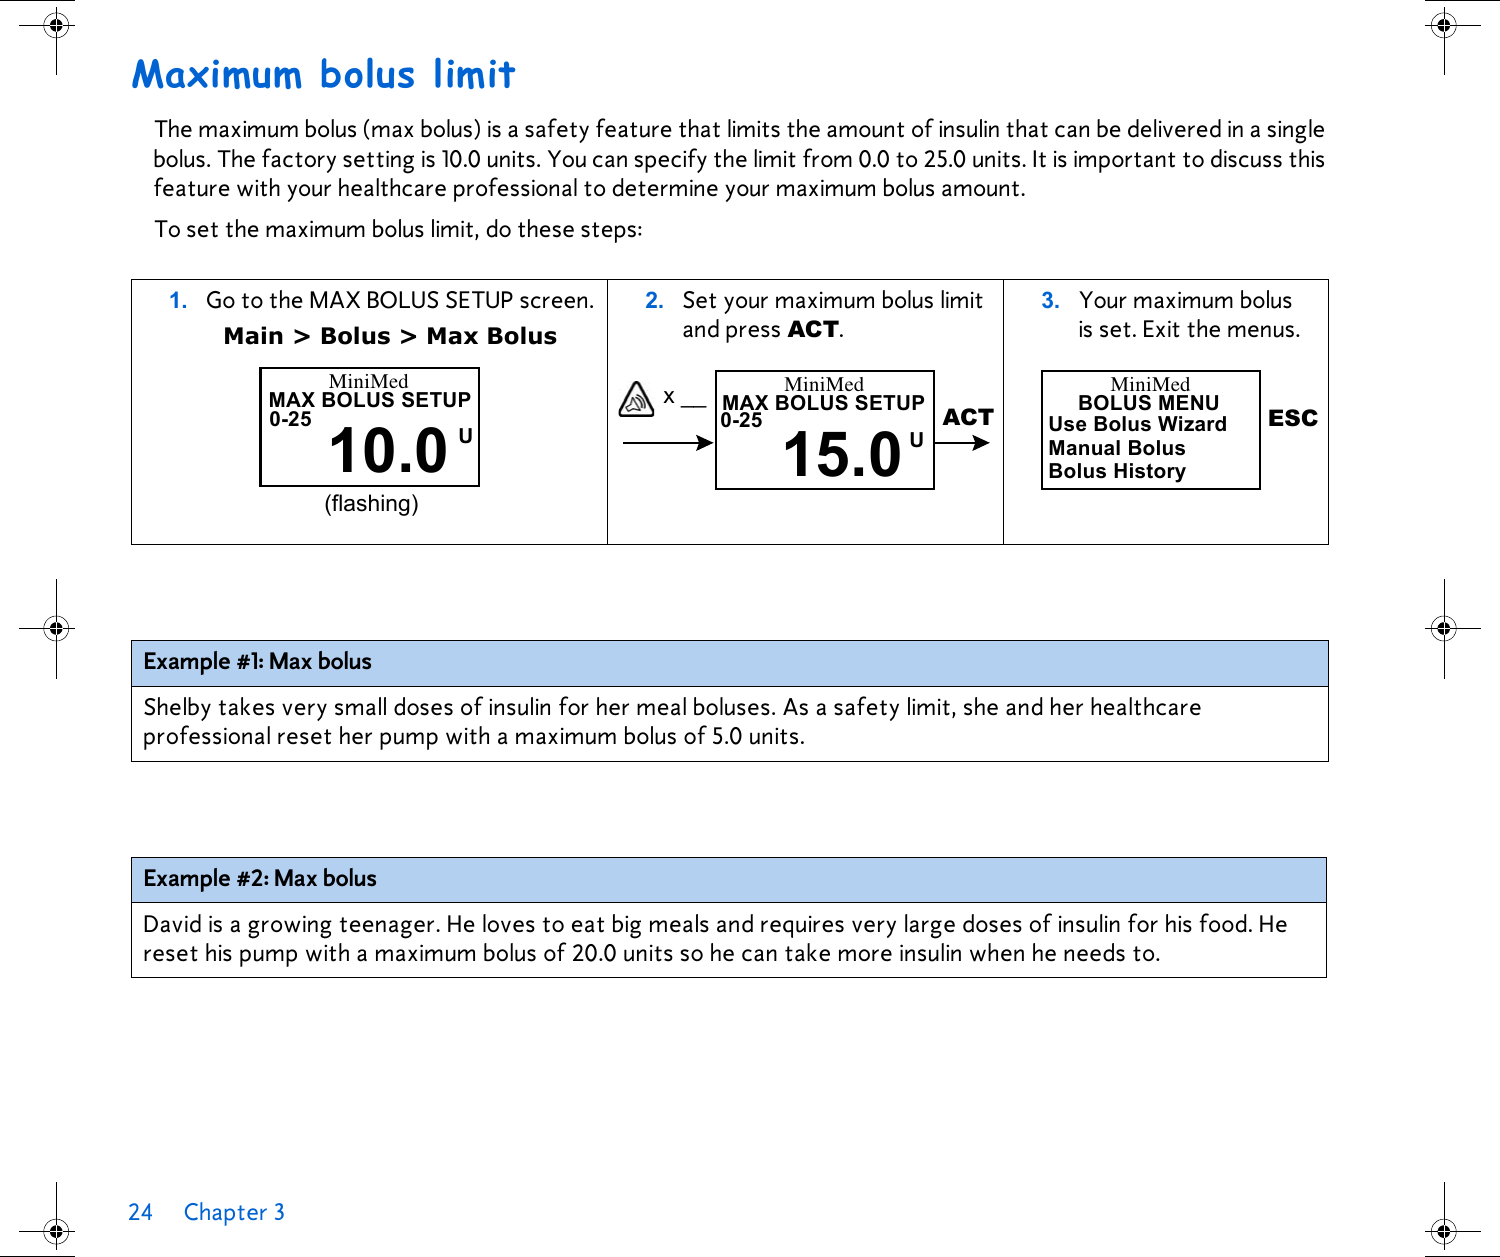 24 Chapter 3 Maximum bolus limitThe maximum bolus (max bolus) is a safety feature that limits the amount of insulin that can be delivered in a single bolus. The factory setting is 10.0 units. You can specify the limit from 0.0 to 25.0 units. It is important to discuss this feature with your healthcare professional to determine your maximum bolus amount. To set the maximum bolus limit, do these steps: 1. Go to the MAX BOLUS SETUP screen.Main &gt; Bolus &gt; Max Bolus2. Set your maximum bolus limit and press ACT. 3. Your maximum bolus is set. Exit the menus. Example #1: Max bolusShelby takes very small doses of insulin for her meal boluses. As a safety limit, she and her healthcare professional reset her pump with a maximum bolus of 5.0 units. Example #2: Max bolusDavid is a growing teenager. He loves to eat big meals and requires very large doses of insulin for his food. He reset his pump with a maximum bolus of 20.0 units so he can take more insulin when he needs to.(flashing)MiniMedMAX BOLUS SETUP10.0 U0-25 x __ MAX BOLUS SETUP15.0U0-25 ACTMiniMed BOLUS MENUUse Bolus WizardManual BolusBolus HistoryESCMiniMed